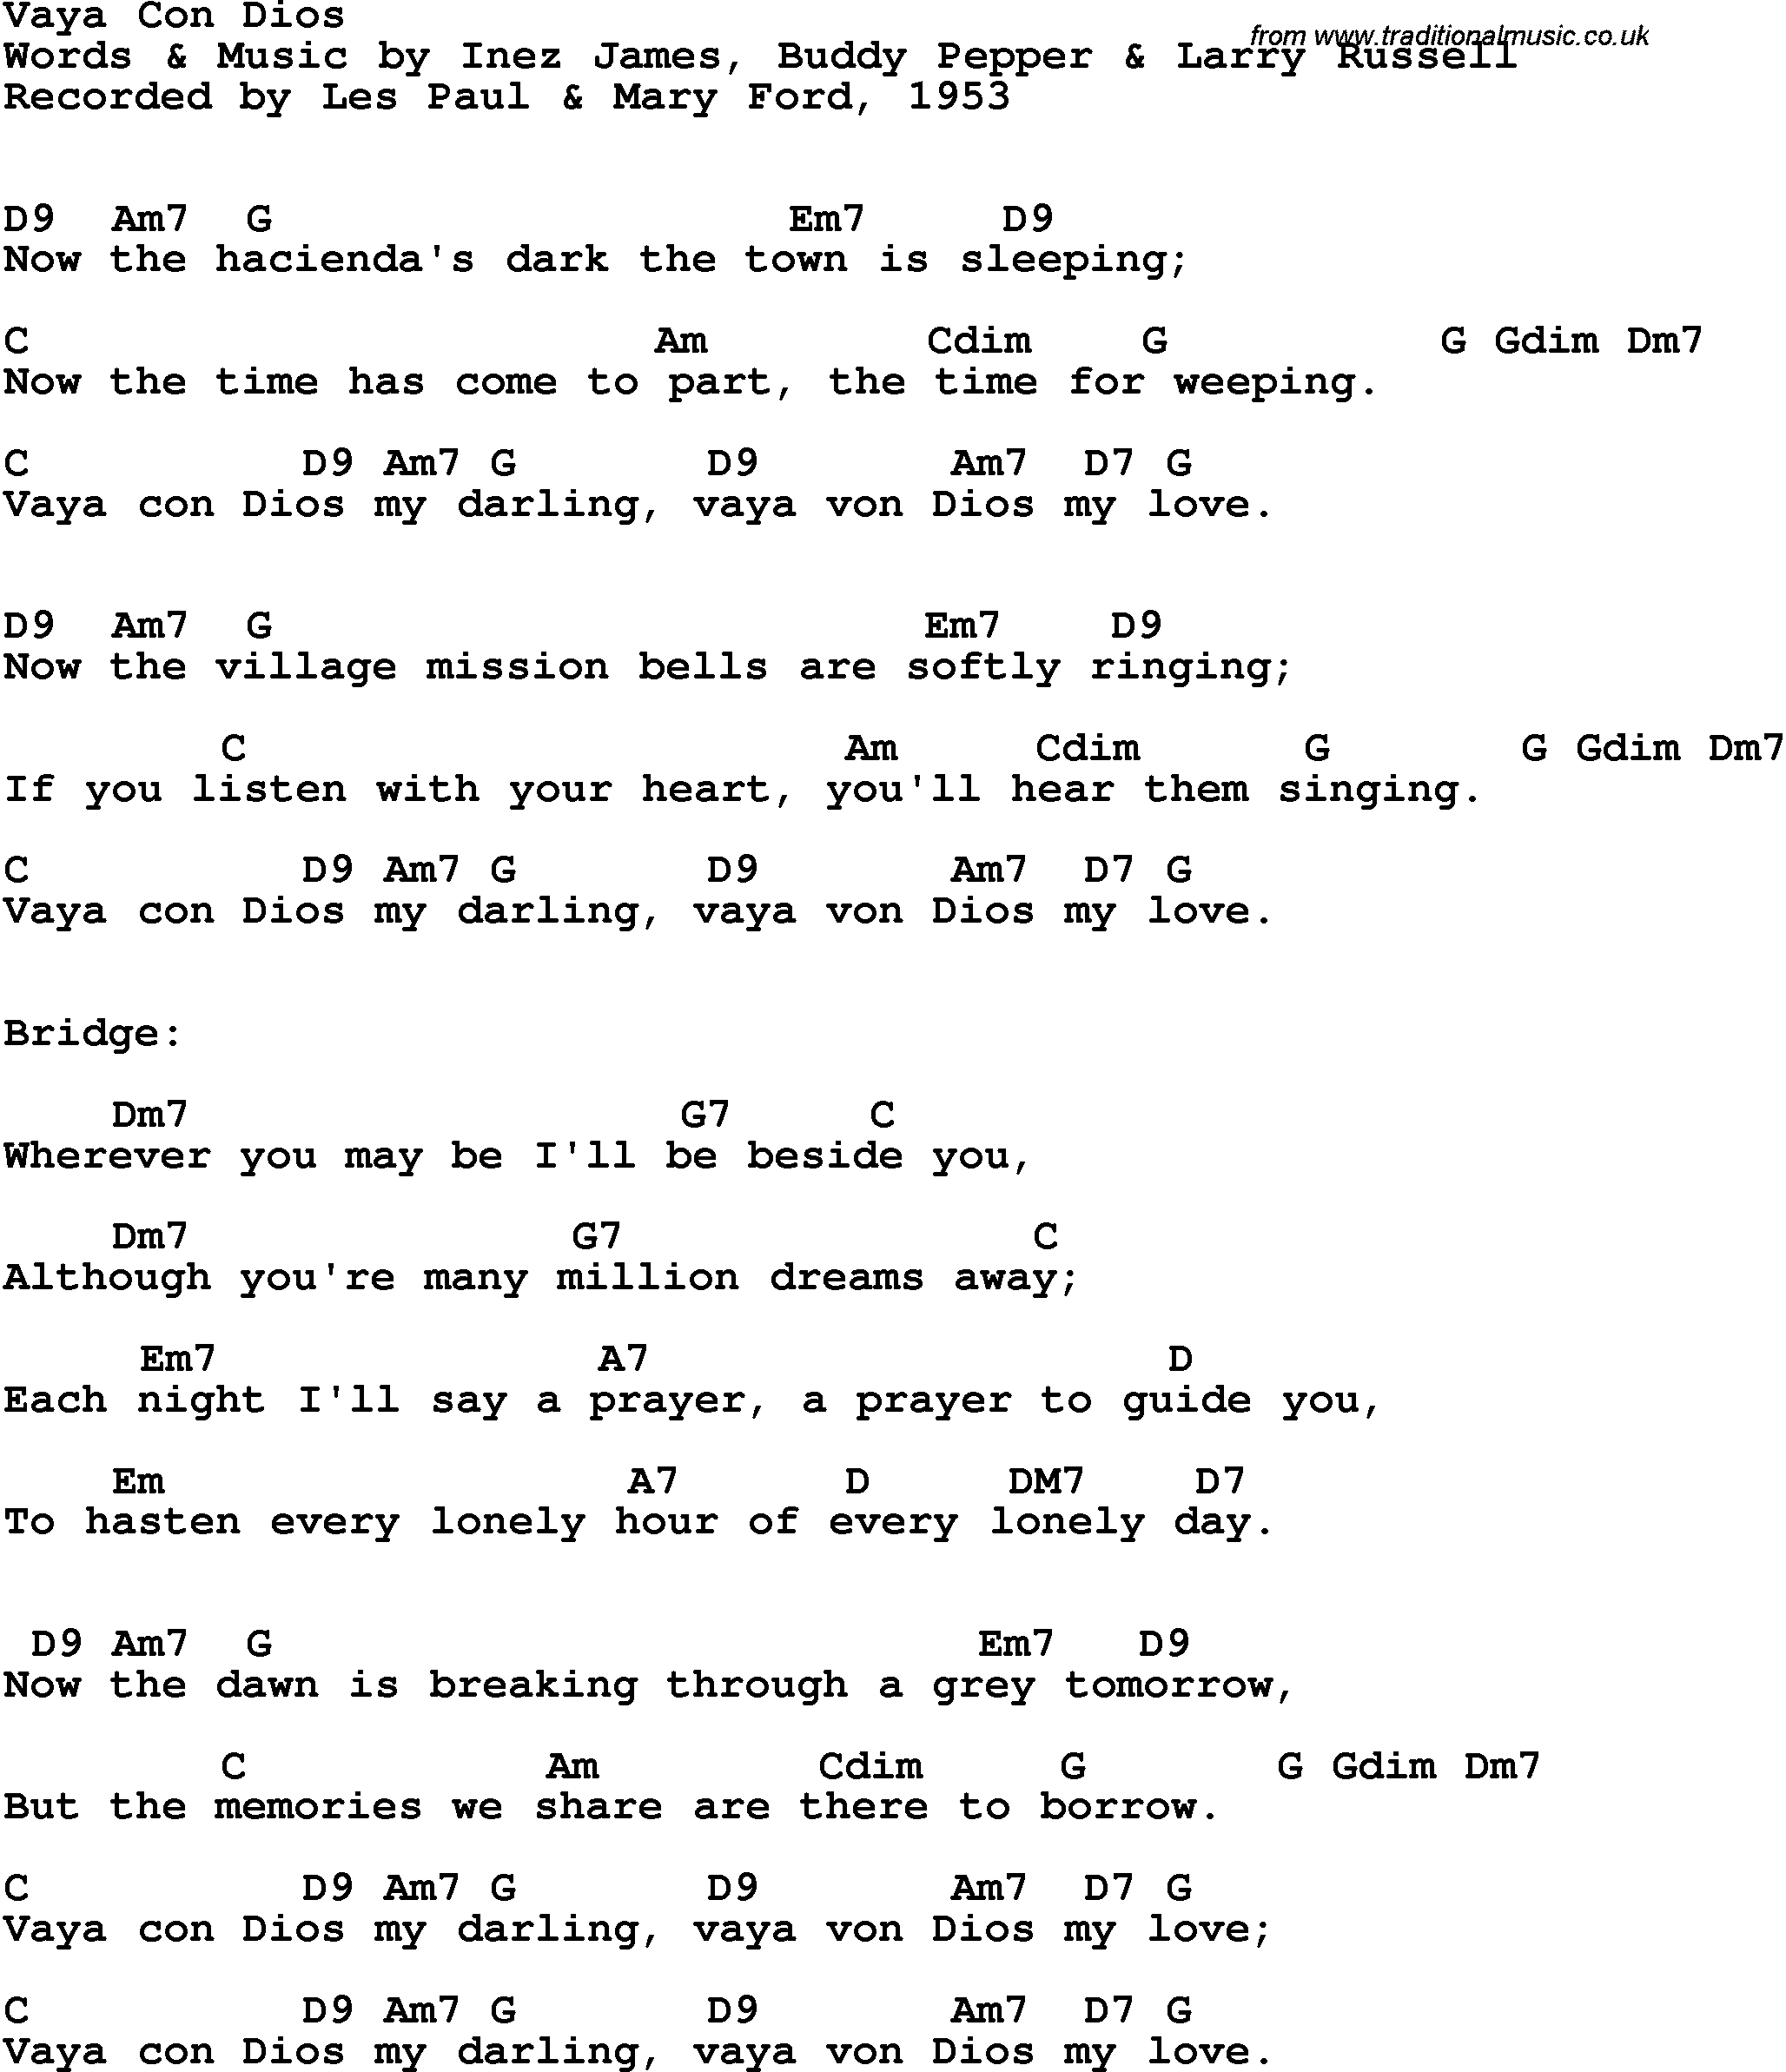 Song Lyrics with guitar chords for Vaya Con Dios - Les Paul & Mary Ford, 1953